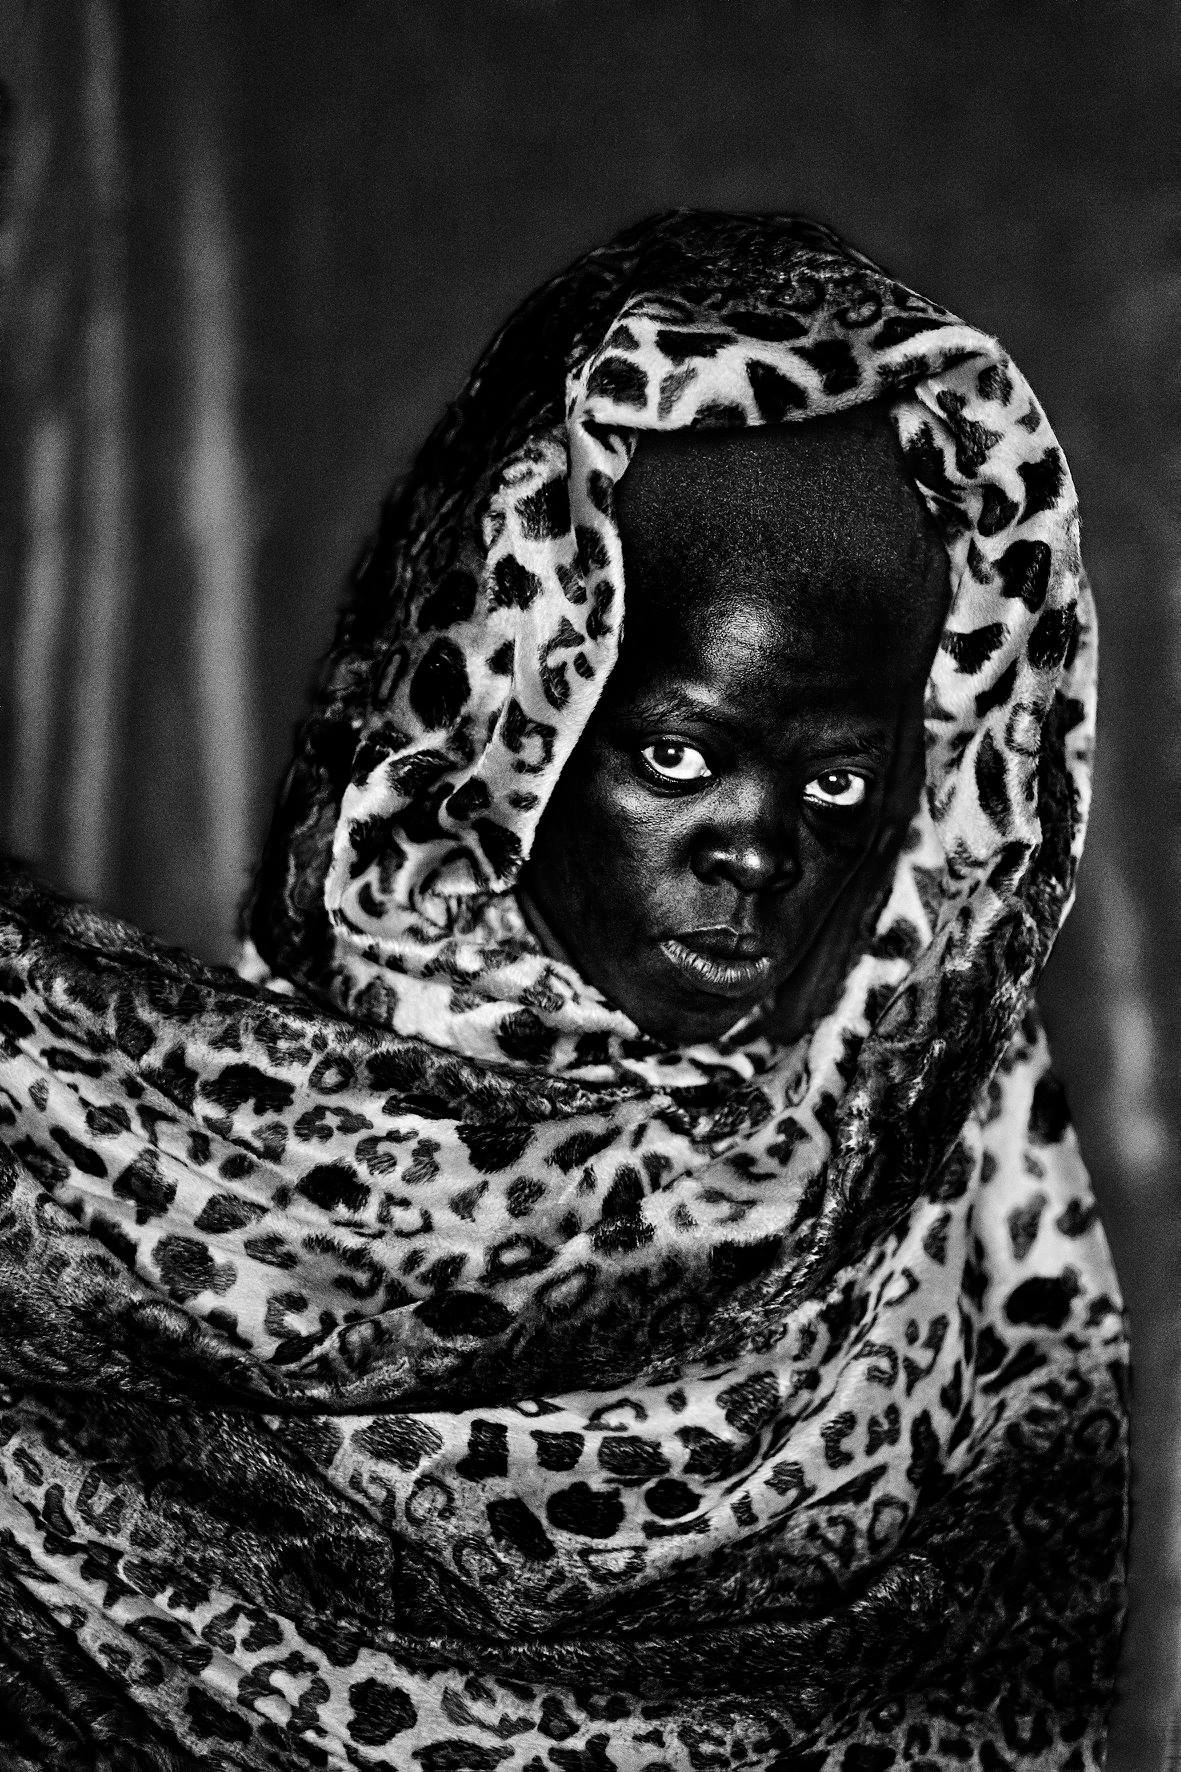 Photo: ‘Thabile, Parktown, 2015’, number 1 out of an edition of 5. The photo is part of Zanele Muholi’s ongoing Somnyama Ngonyama (‘Hail the Black Lioness’)